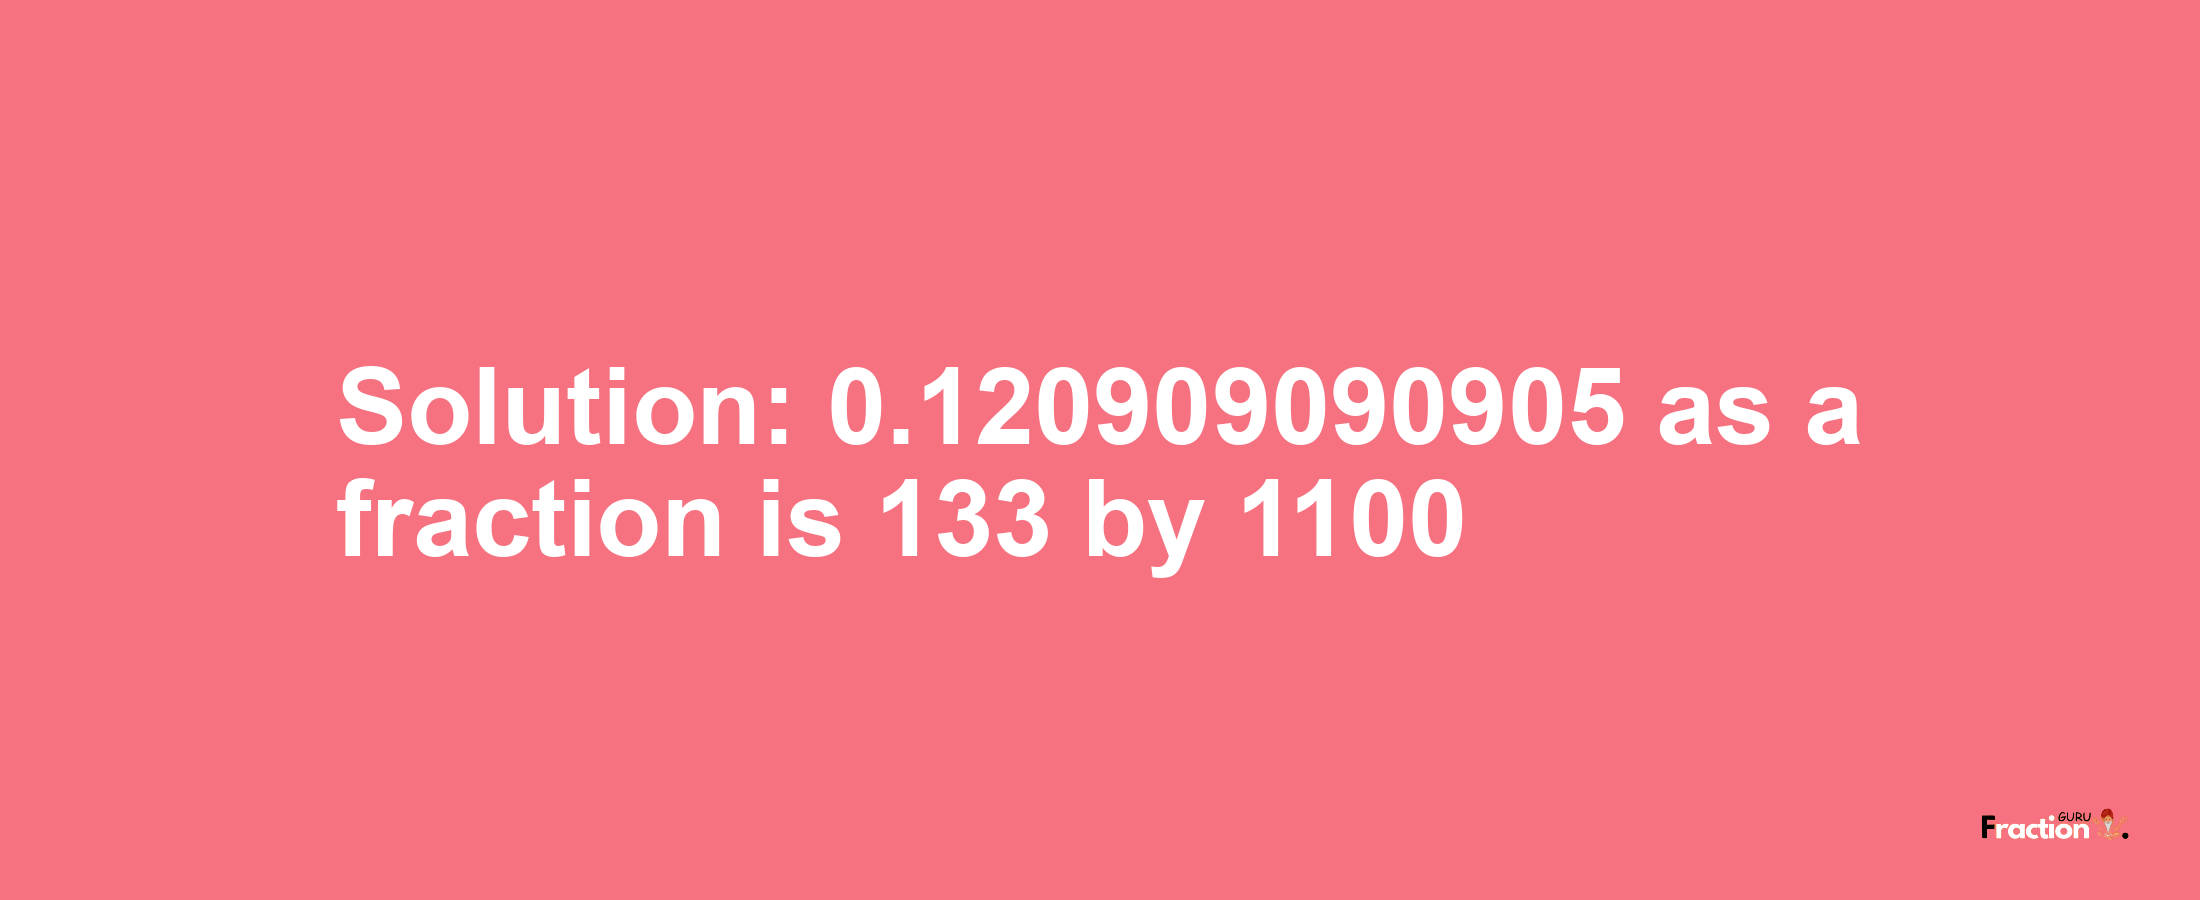 Solution:0.120909090905 as a fraction is 133/1100